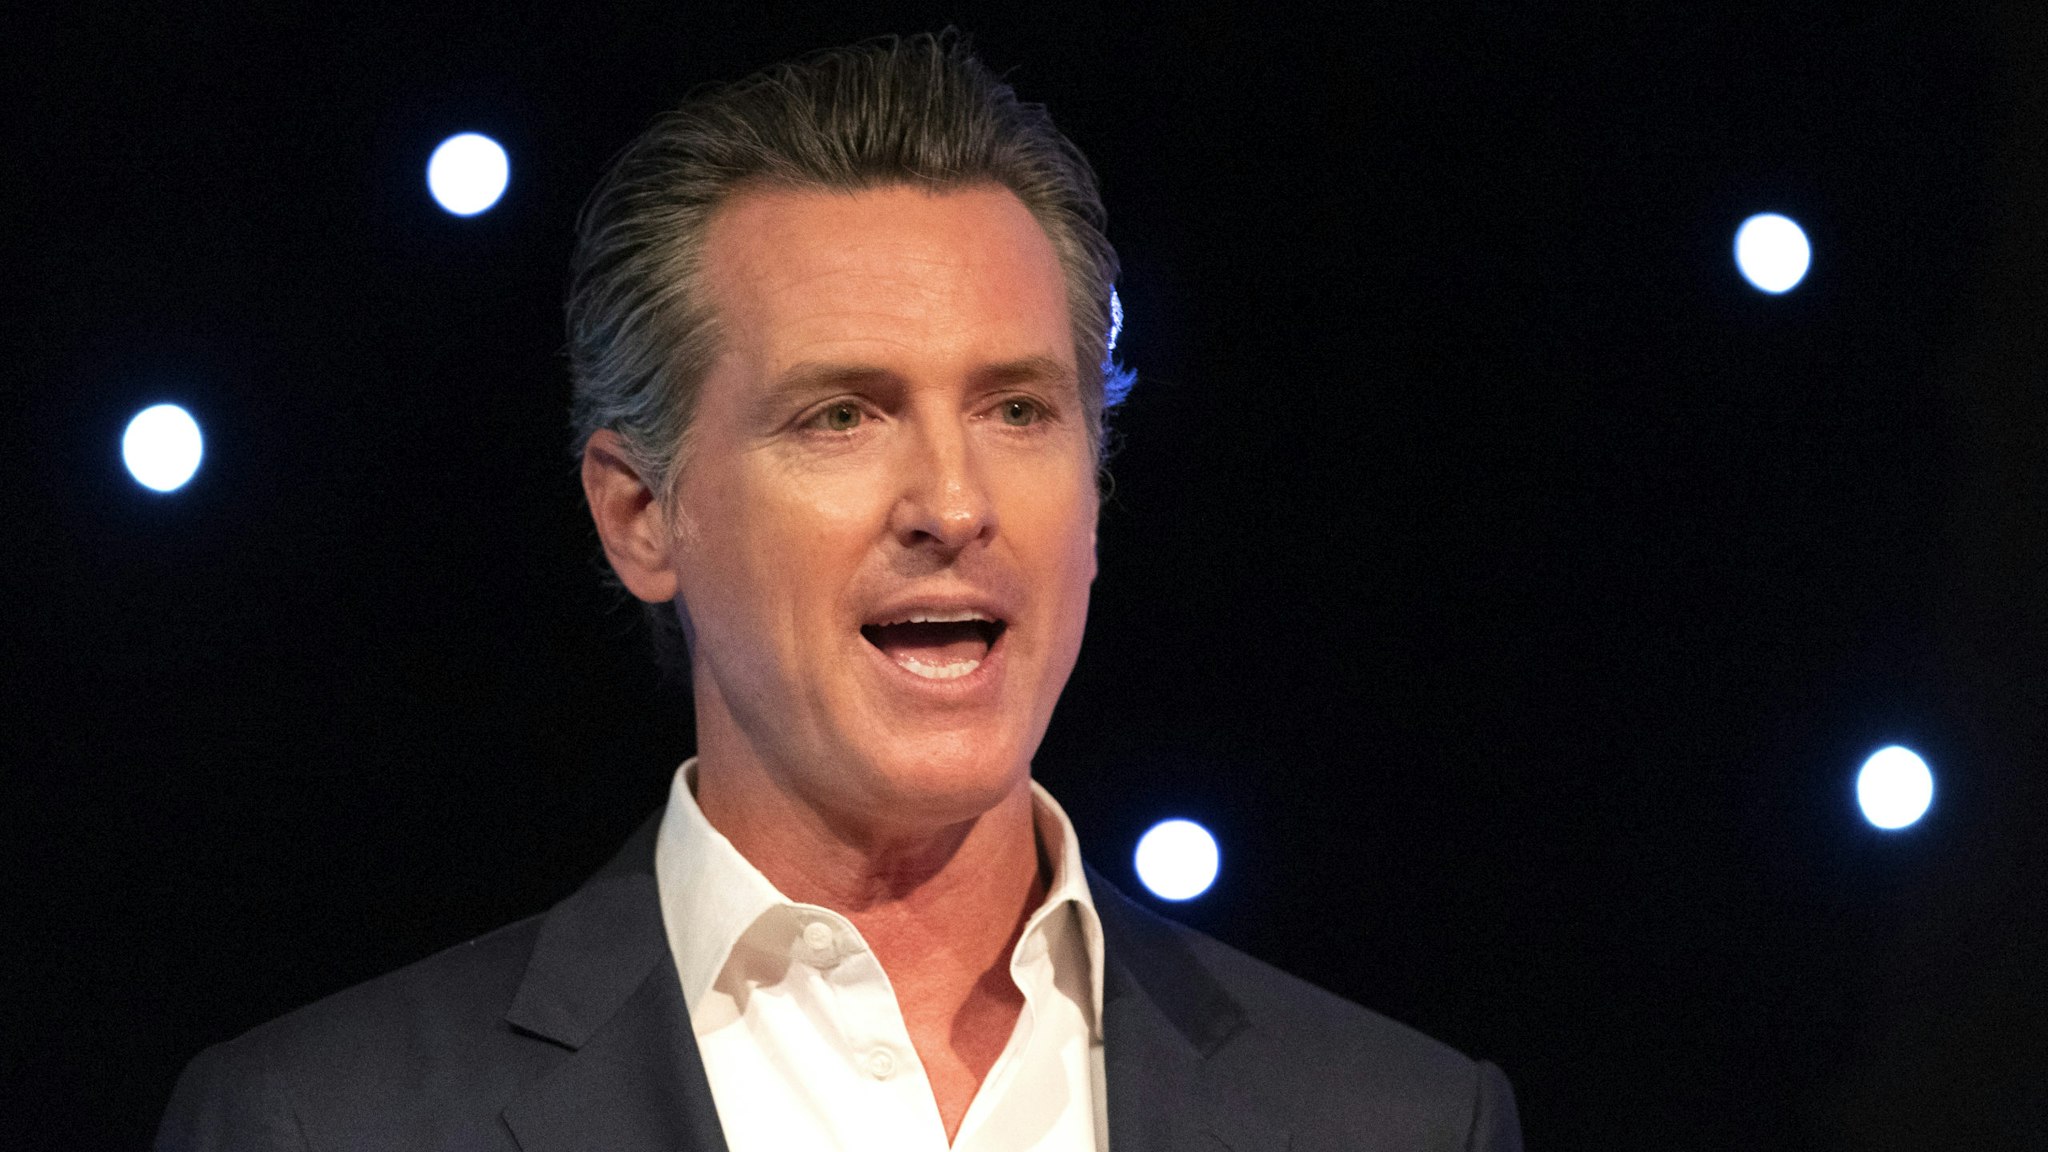 California Governor Gavin Newsom speaks at Planets Explore 19 Conference in San Francisco, California on October 15, 2019. The Governor talks about the importance of protecting our environment and enhance the states capability at dealing with natural disasters such as wild fire.